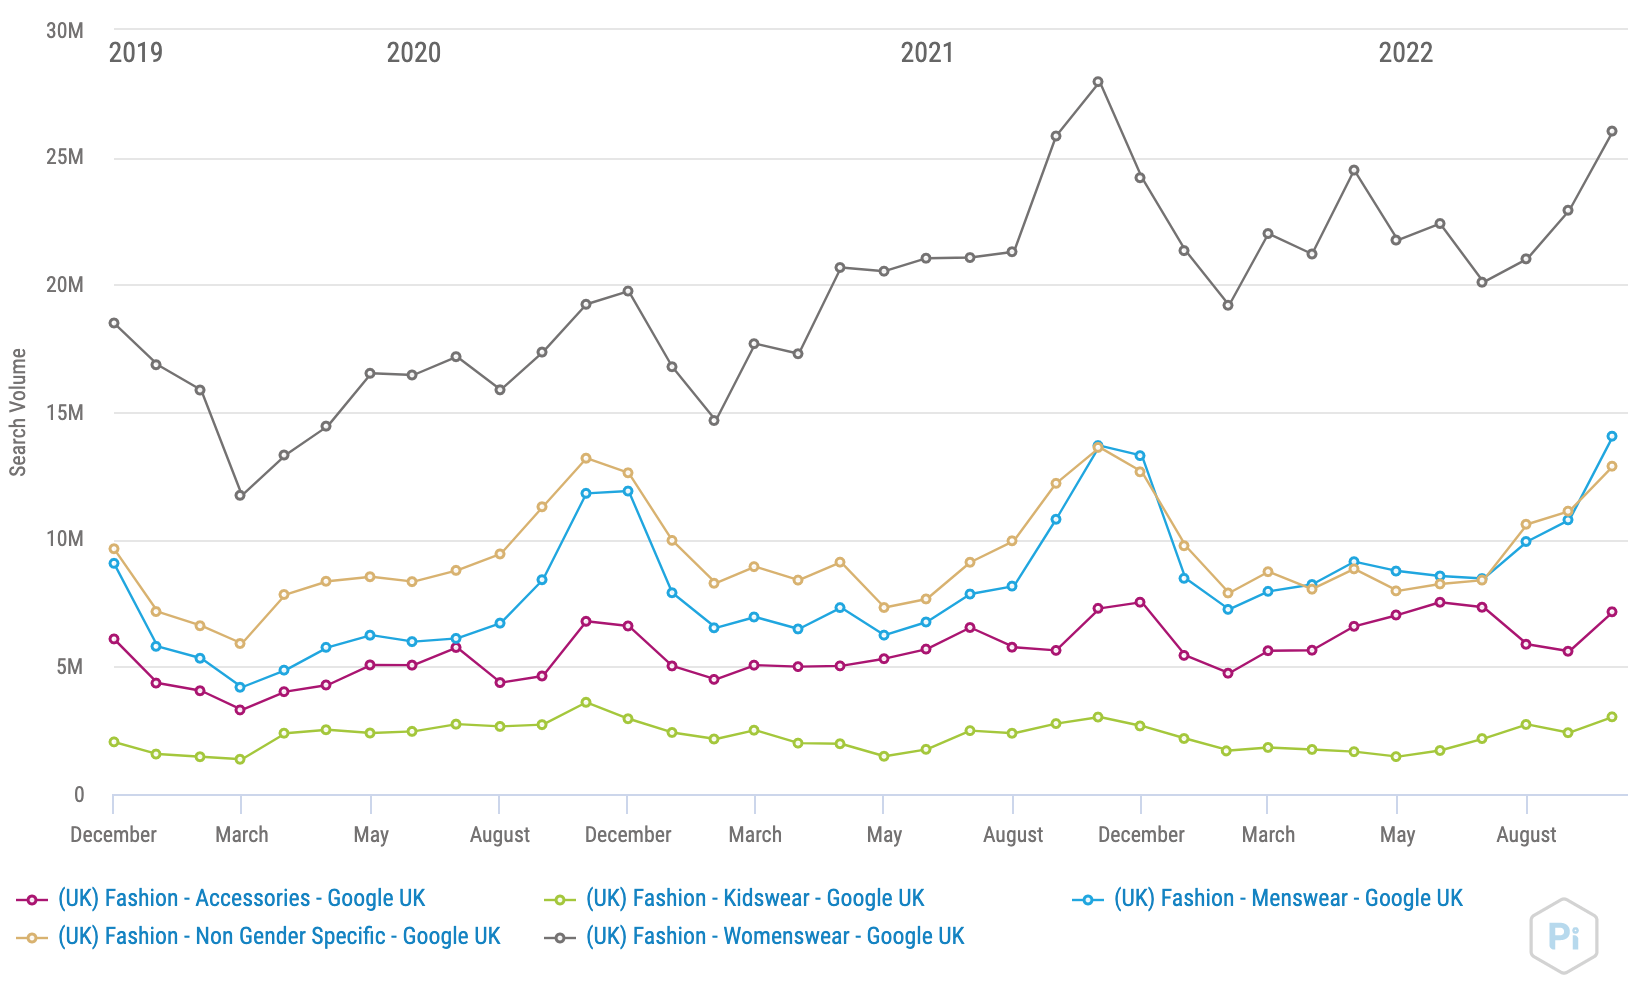 Market Leaderboard insights: What can we learn from Q4’s search behaviour data?